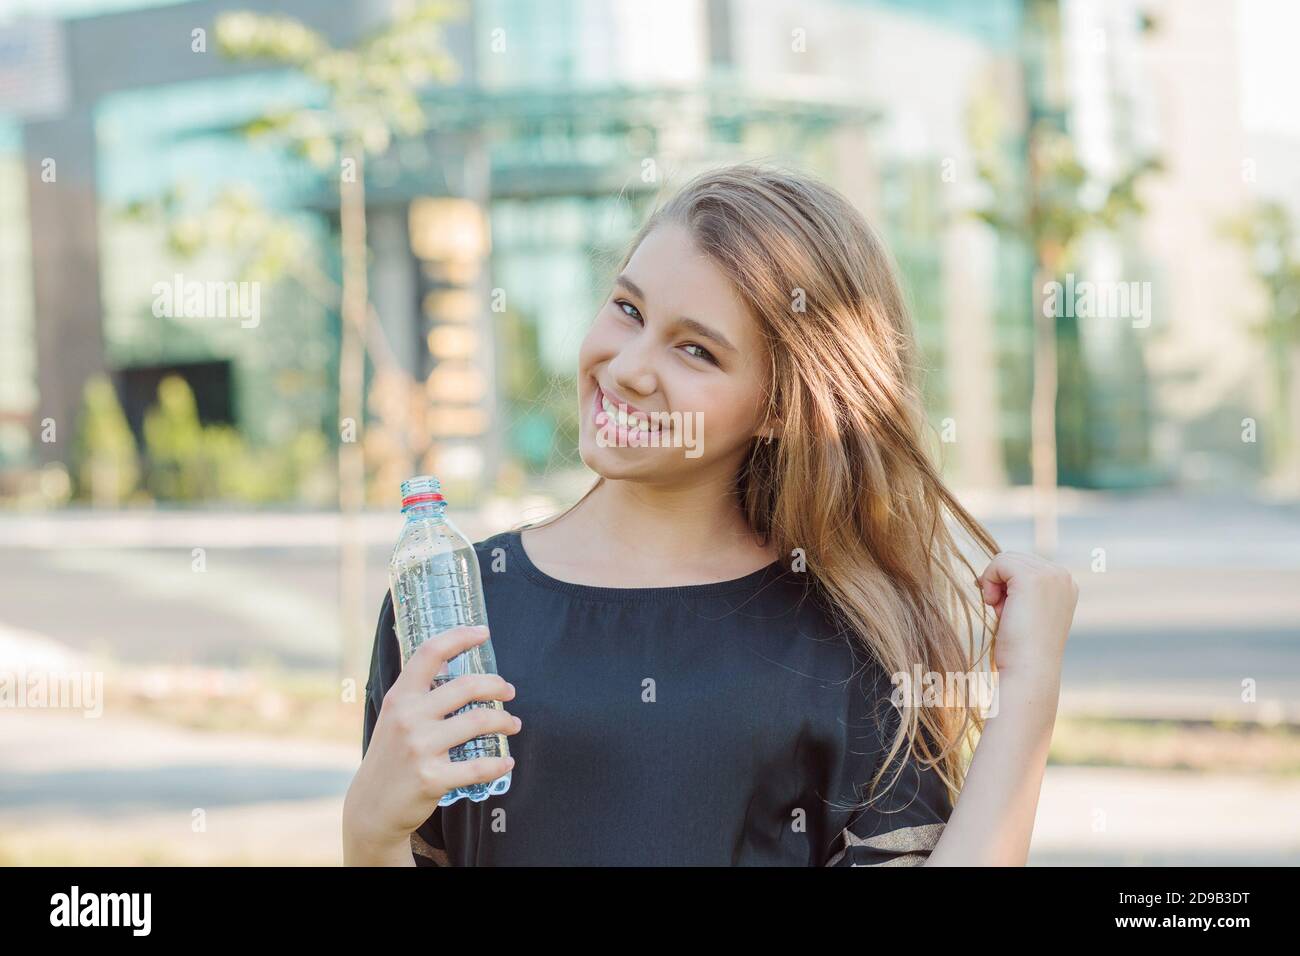 Thirsty. Cute teenager holding a bottle of water in the city smiling. Teen  girl, woman laughing happy about to drink water, posing touching hair city  Stock Photo - Alamy